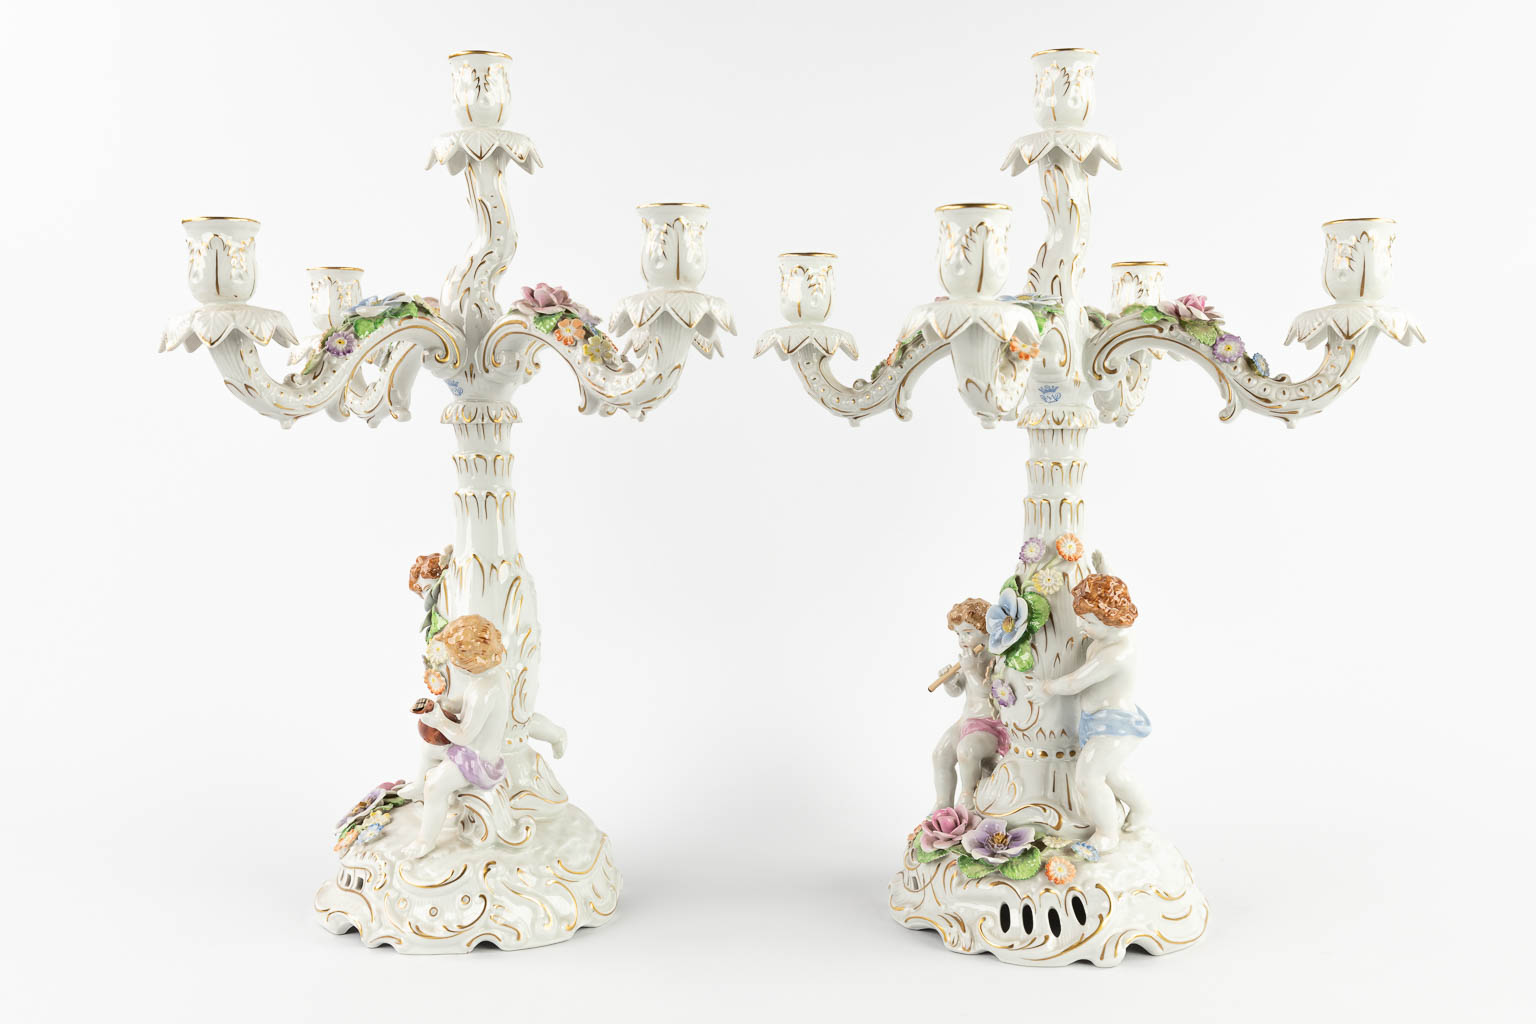 A pair of candelabra, polychrome porcelain decorated with figurines. Marked PMP, 20th C. (D:37 x W:37 x H:49 cm)